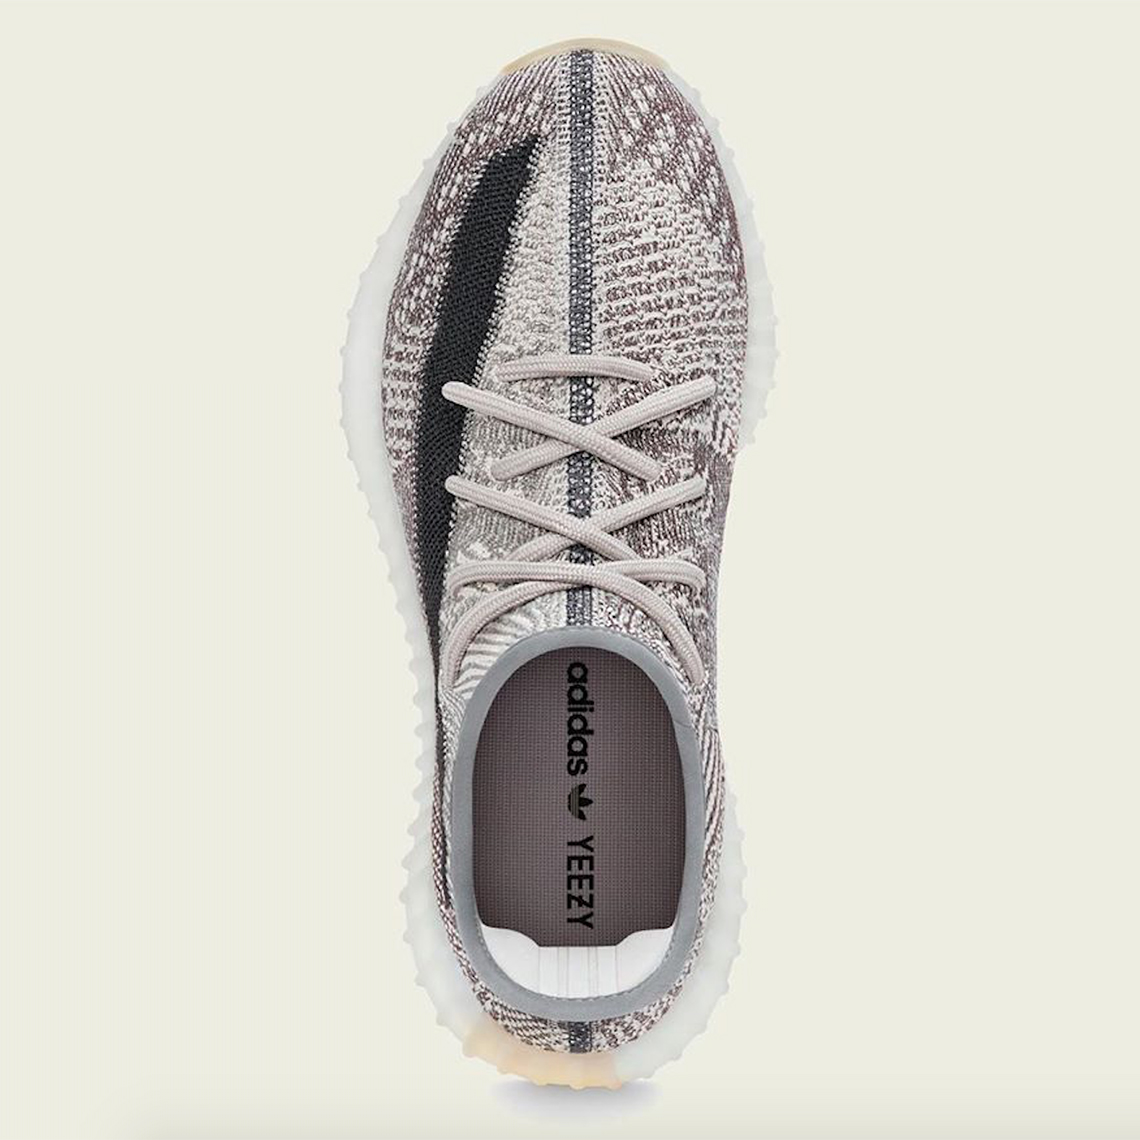 Adidas Yeezy Boost 350 V2 Zyon Fz1267 Official Images 4